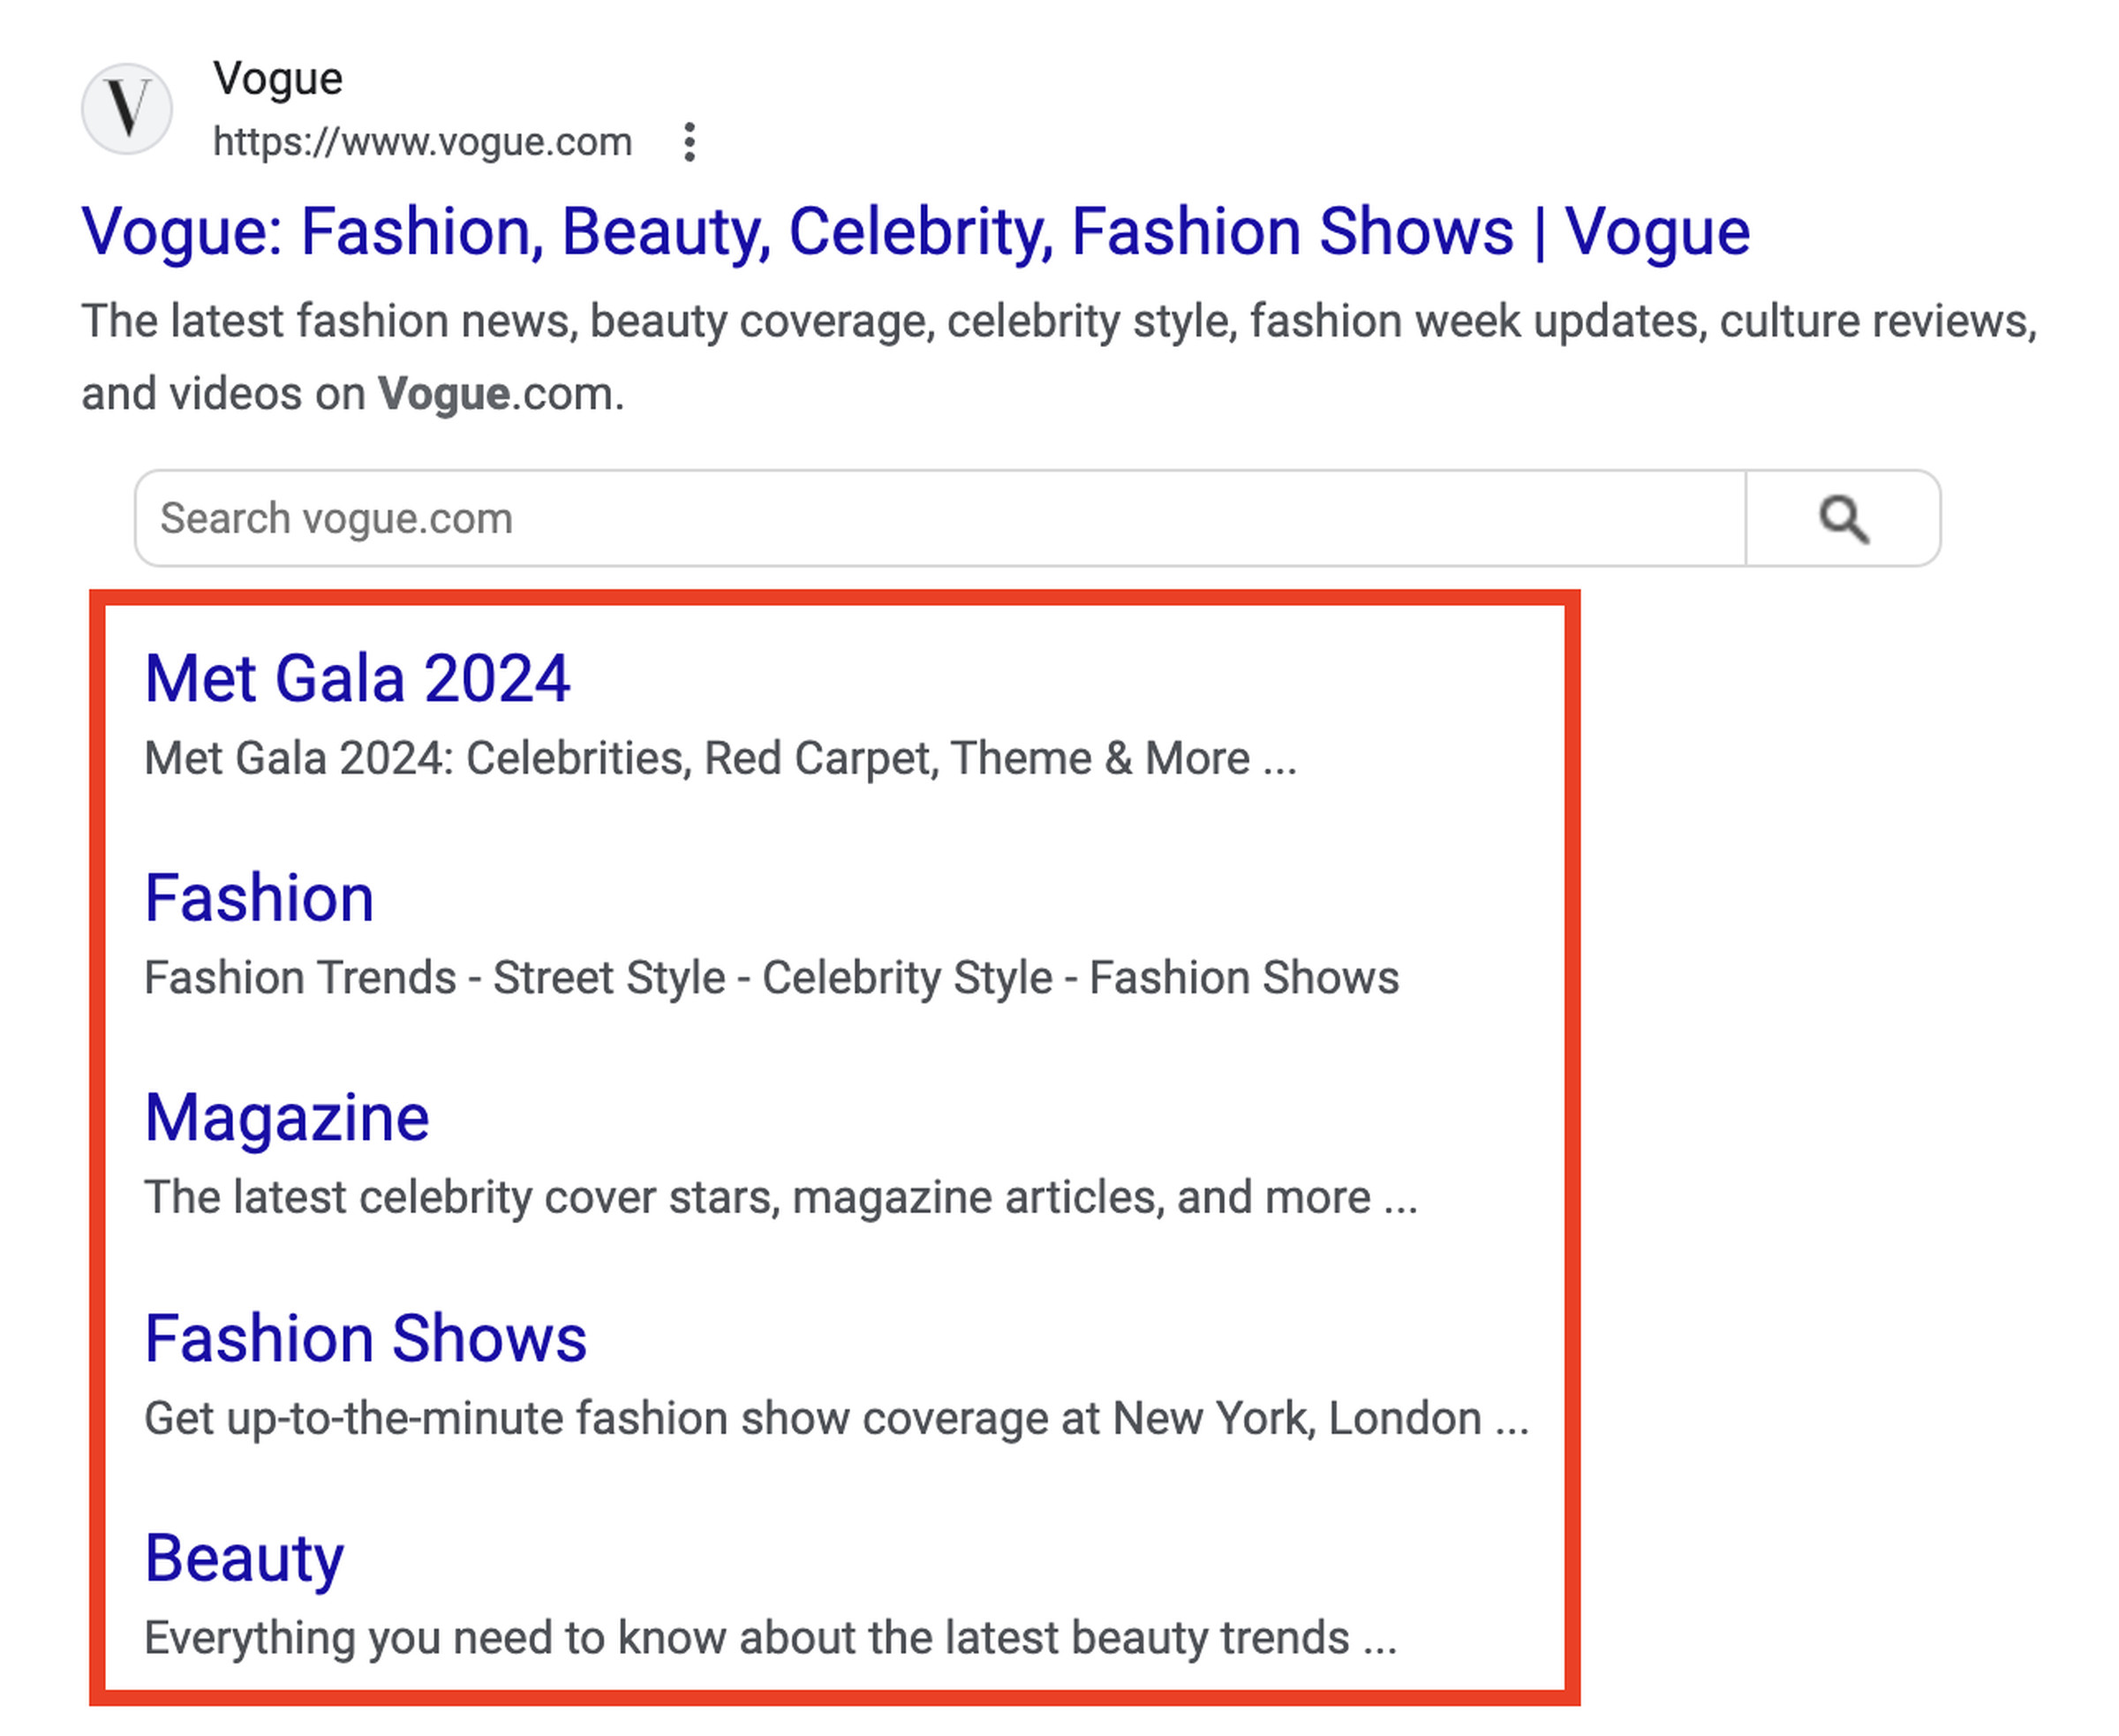 A Google Search screenshot of the Vogue.com result, with sublinks below the main homepage. The links direct to sections like “Met Gala 2024” and “Beauty.”